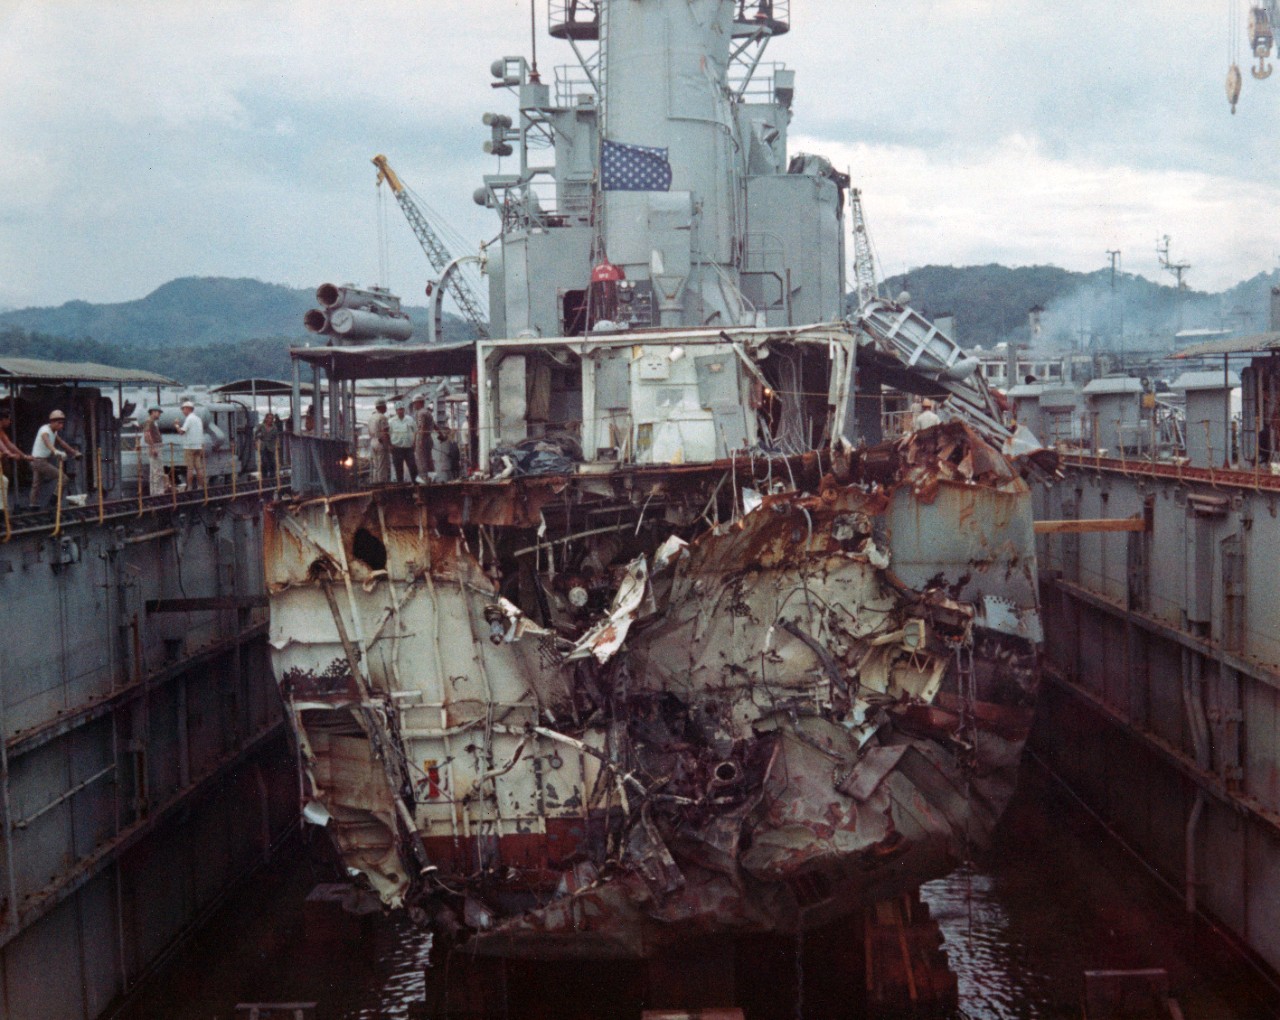 44 color negatives and 7 color prints showing the damaged USS Frank E. Evans (DD-754) being escorted to the auxiliary repair drydock USS Windsor (ADR-22) at Subic Bay, after it had been in involved in a collision with the Australian aircraft carr...